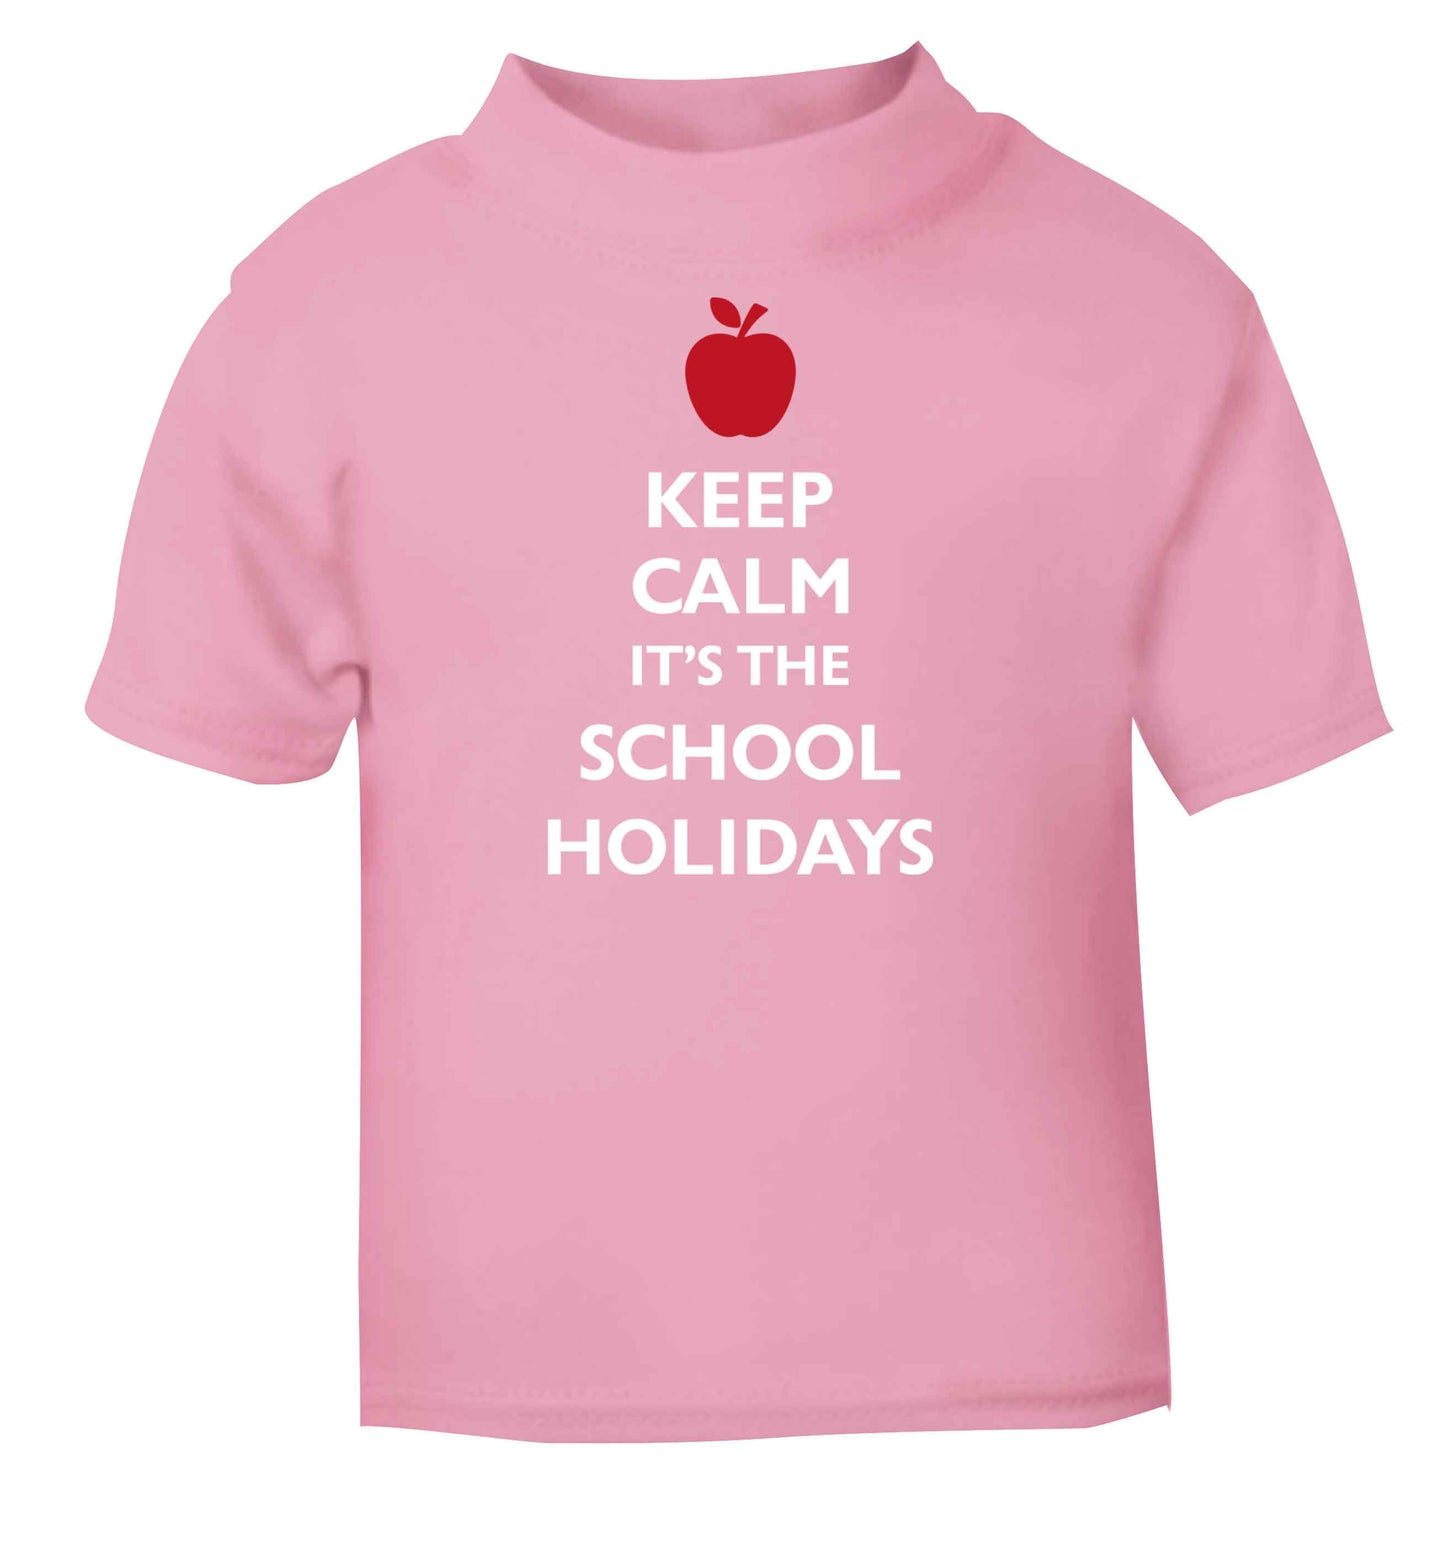 Keep calm it's the school holidays light pink baby toddler Tshirt 2 Years